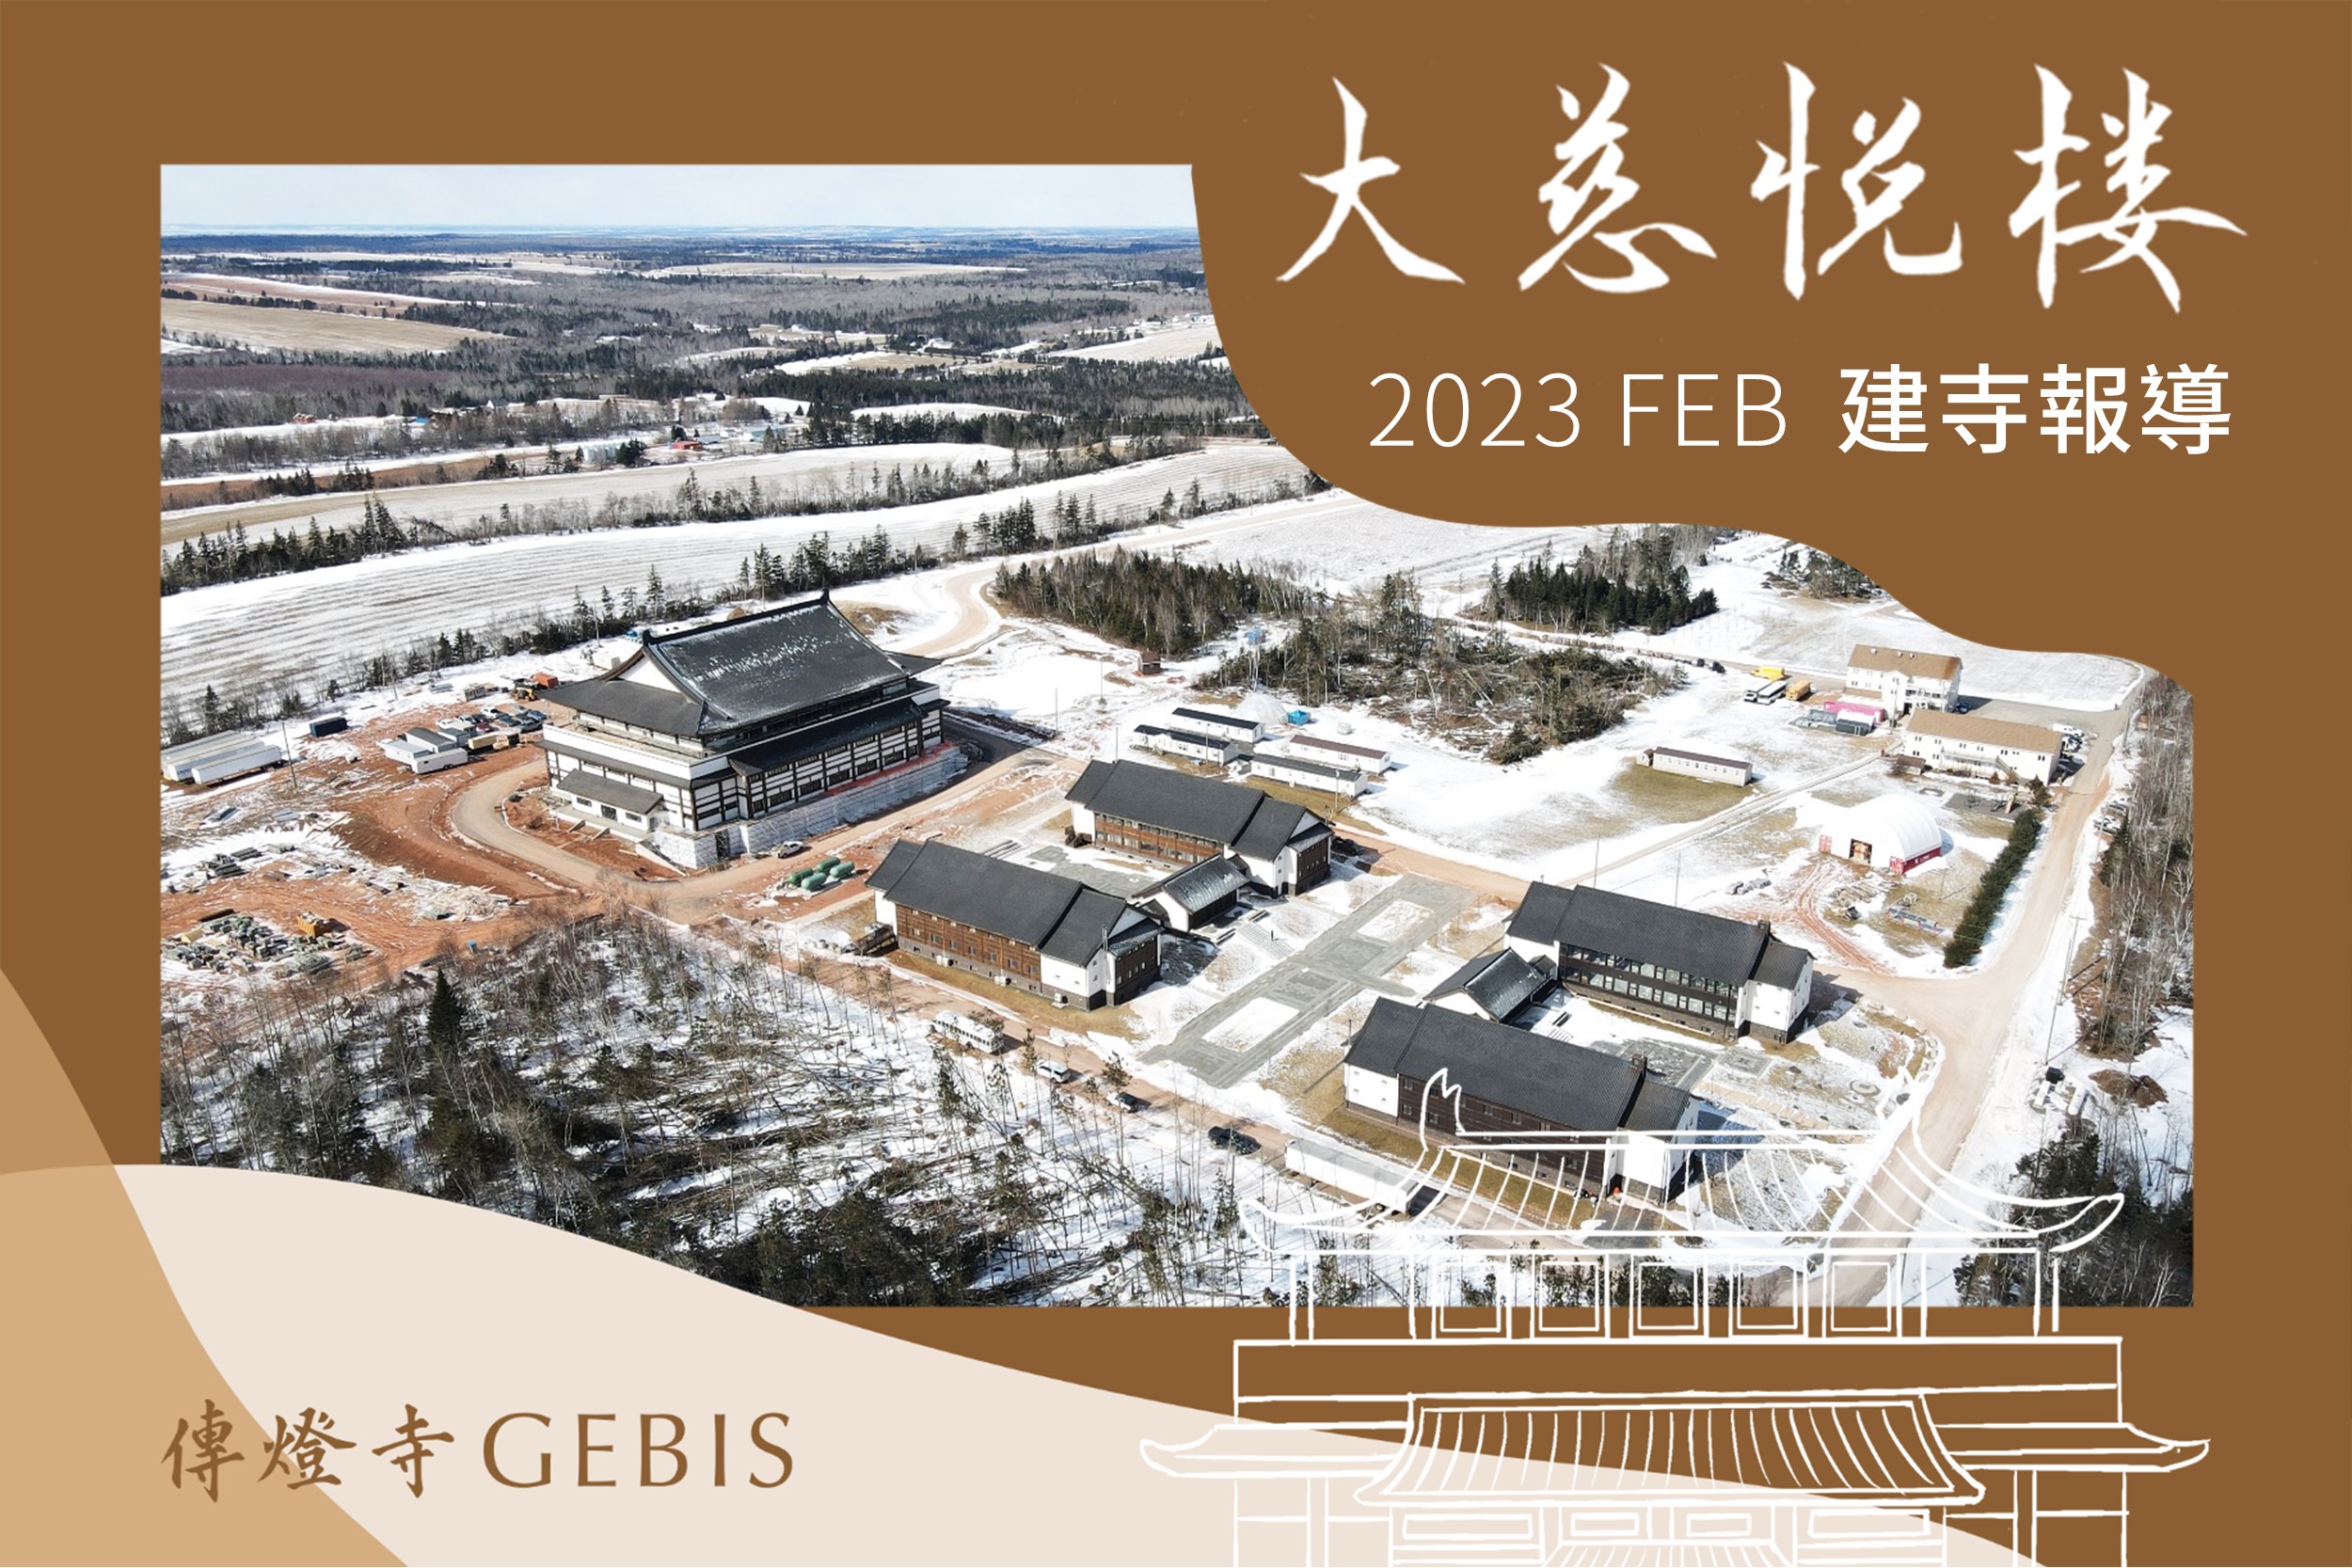 You are currently viewing 傳燈寺大慈悅樓：2023年2月建寺報導